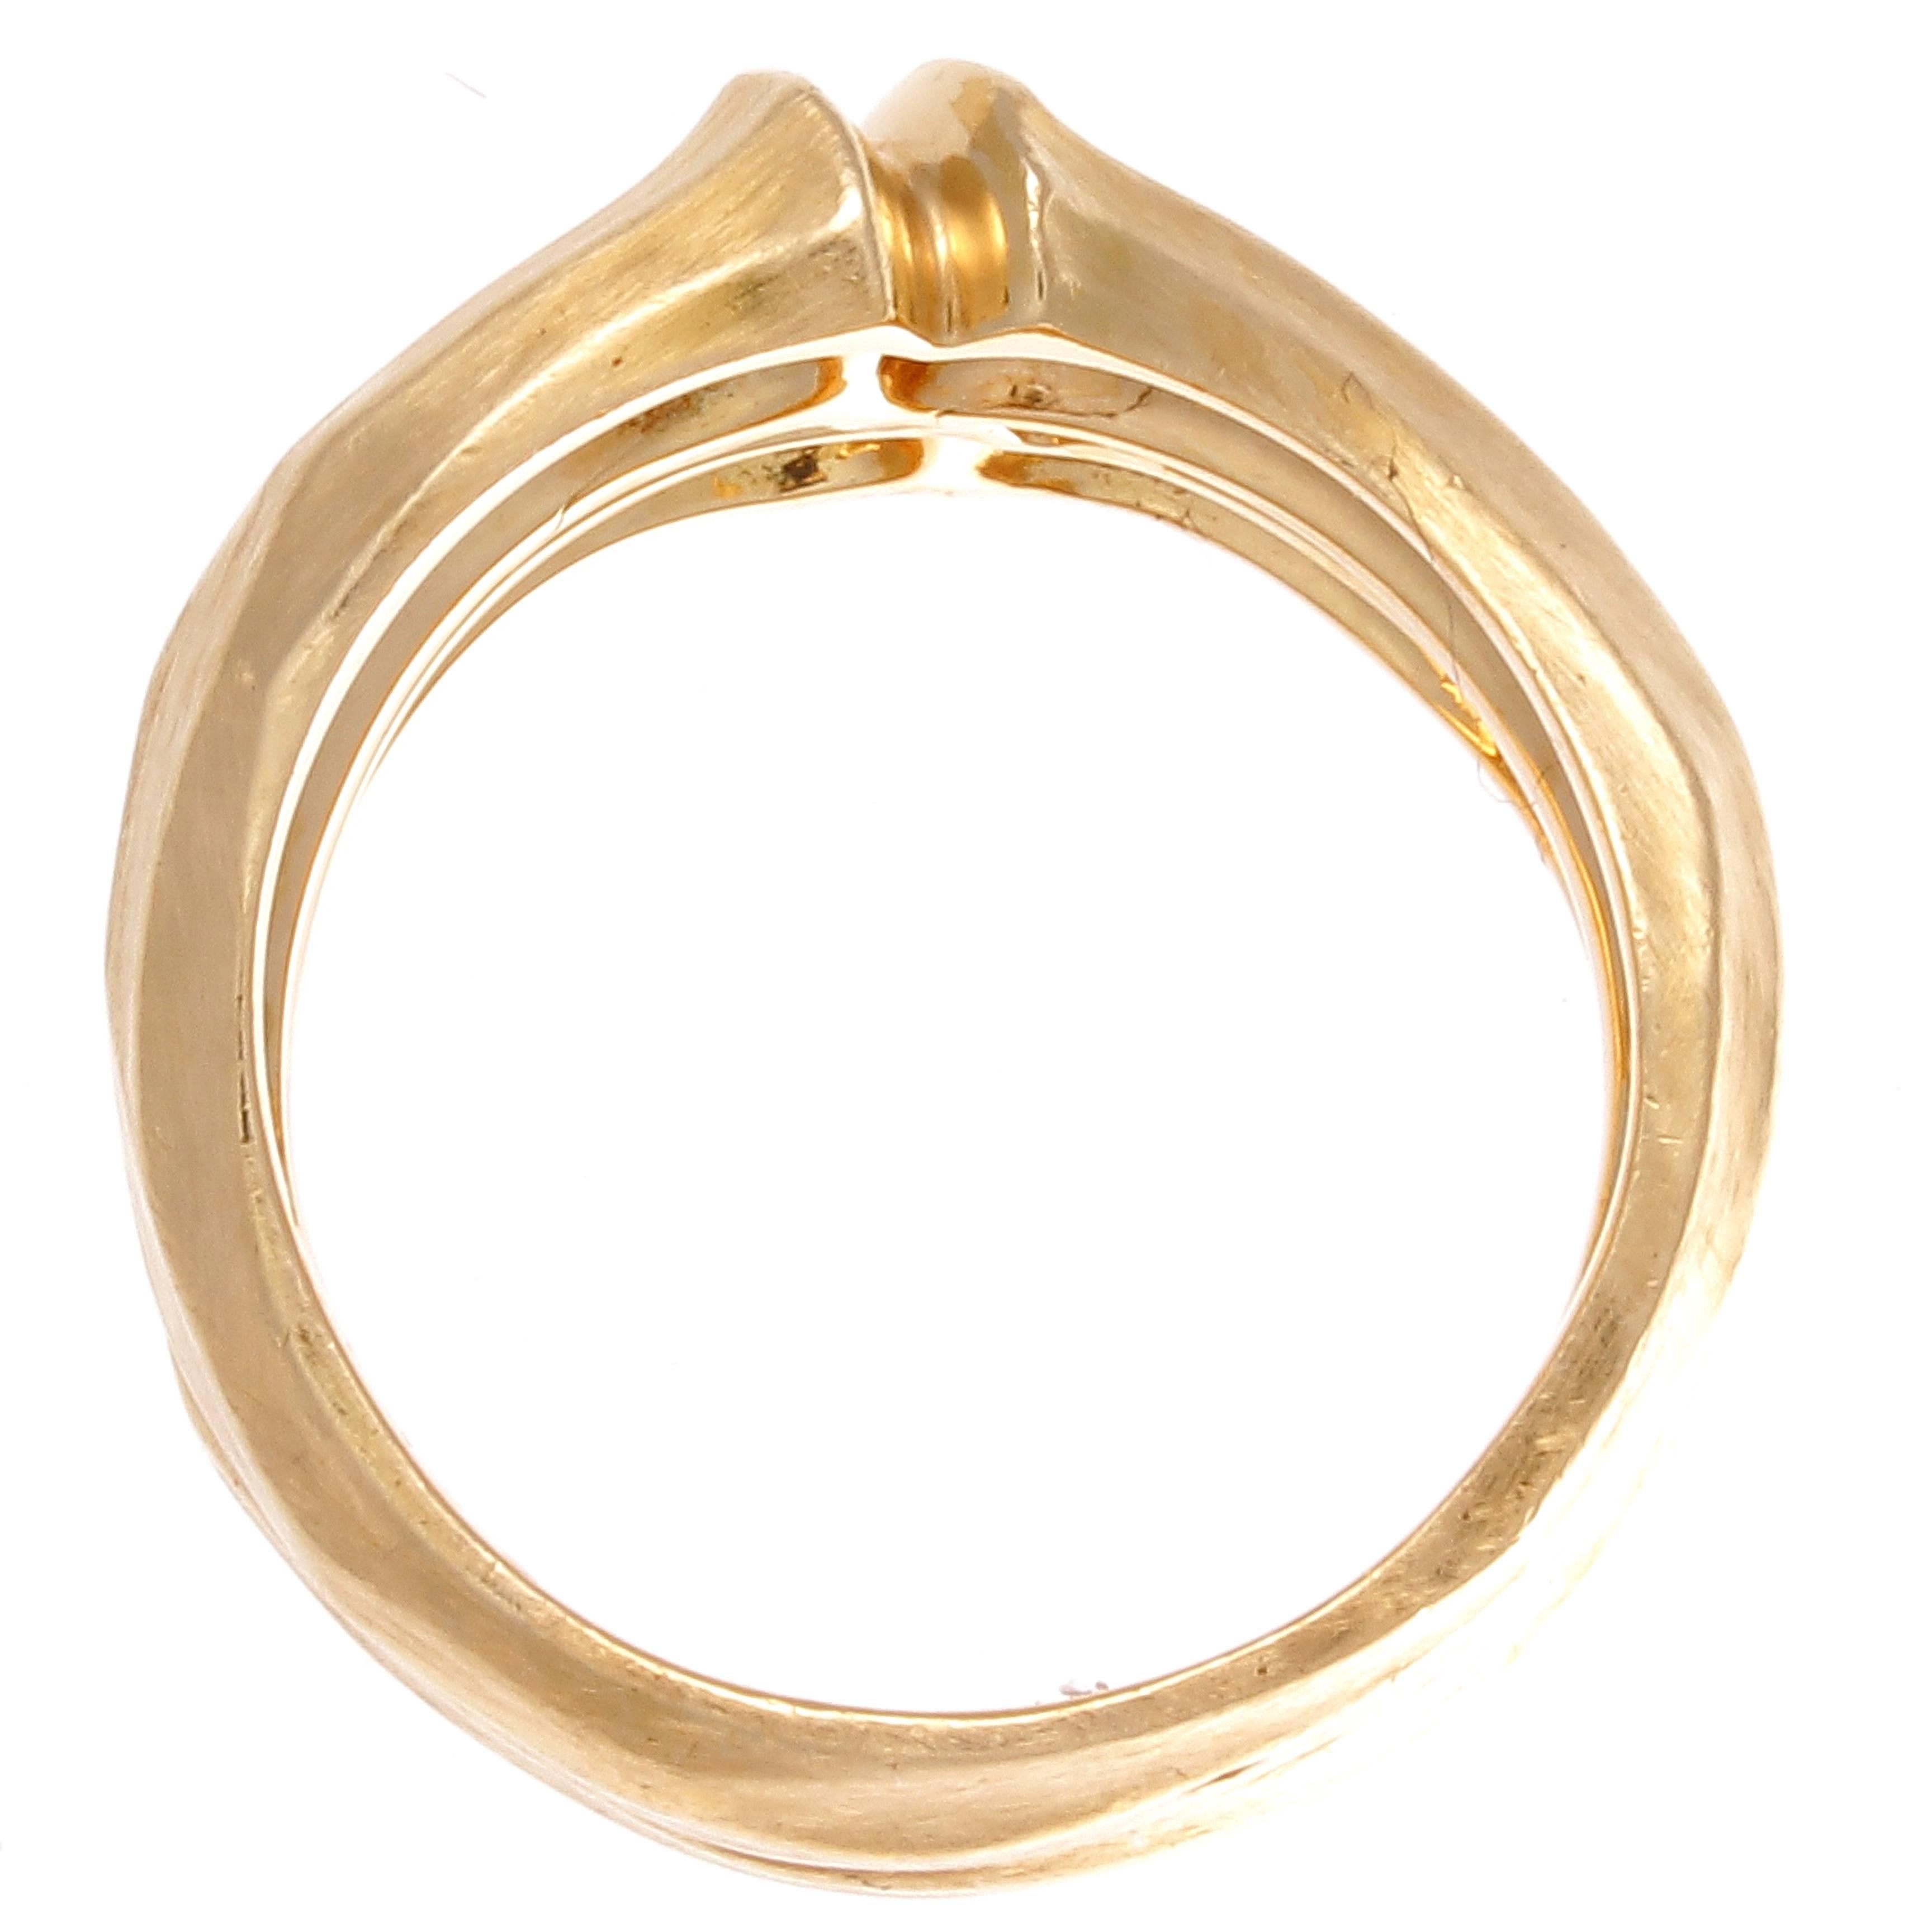 From the bamboo collection at Cartier.  Created in glistening 18k textured yellow gold. Signed Cartier, numbered and stamped with french hallmarks.

Ring size 5-1/4